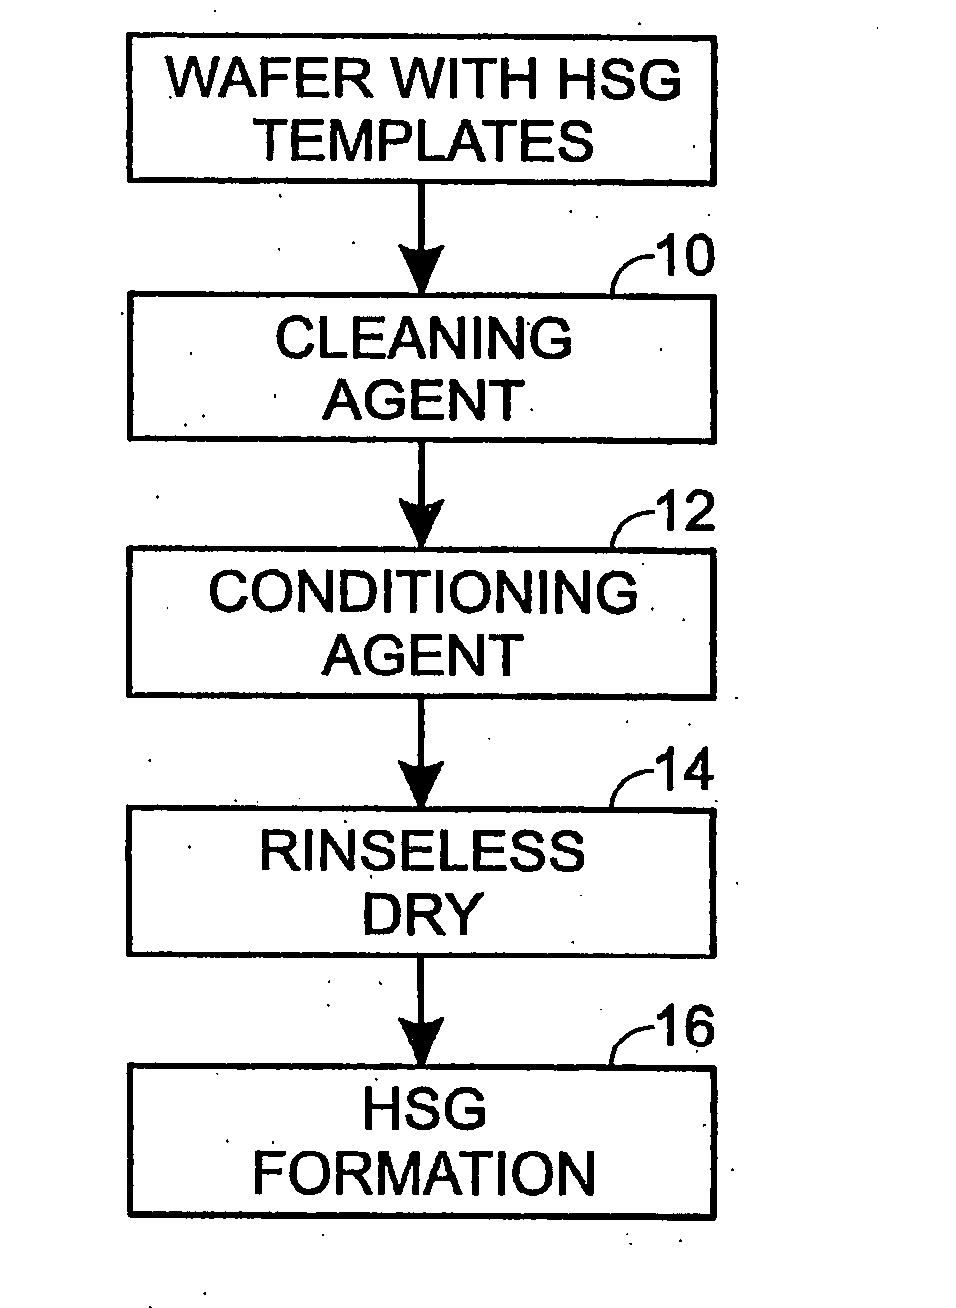 Methods of forming hemisperical grained silicon on a template on a semiconductor work object